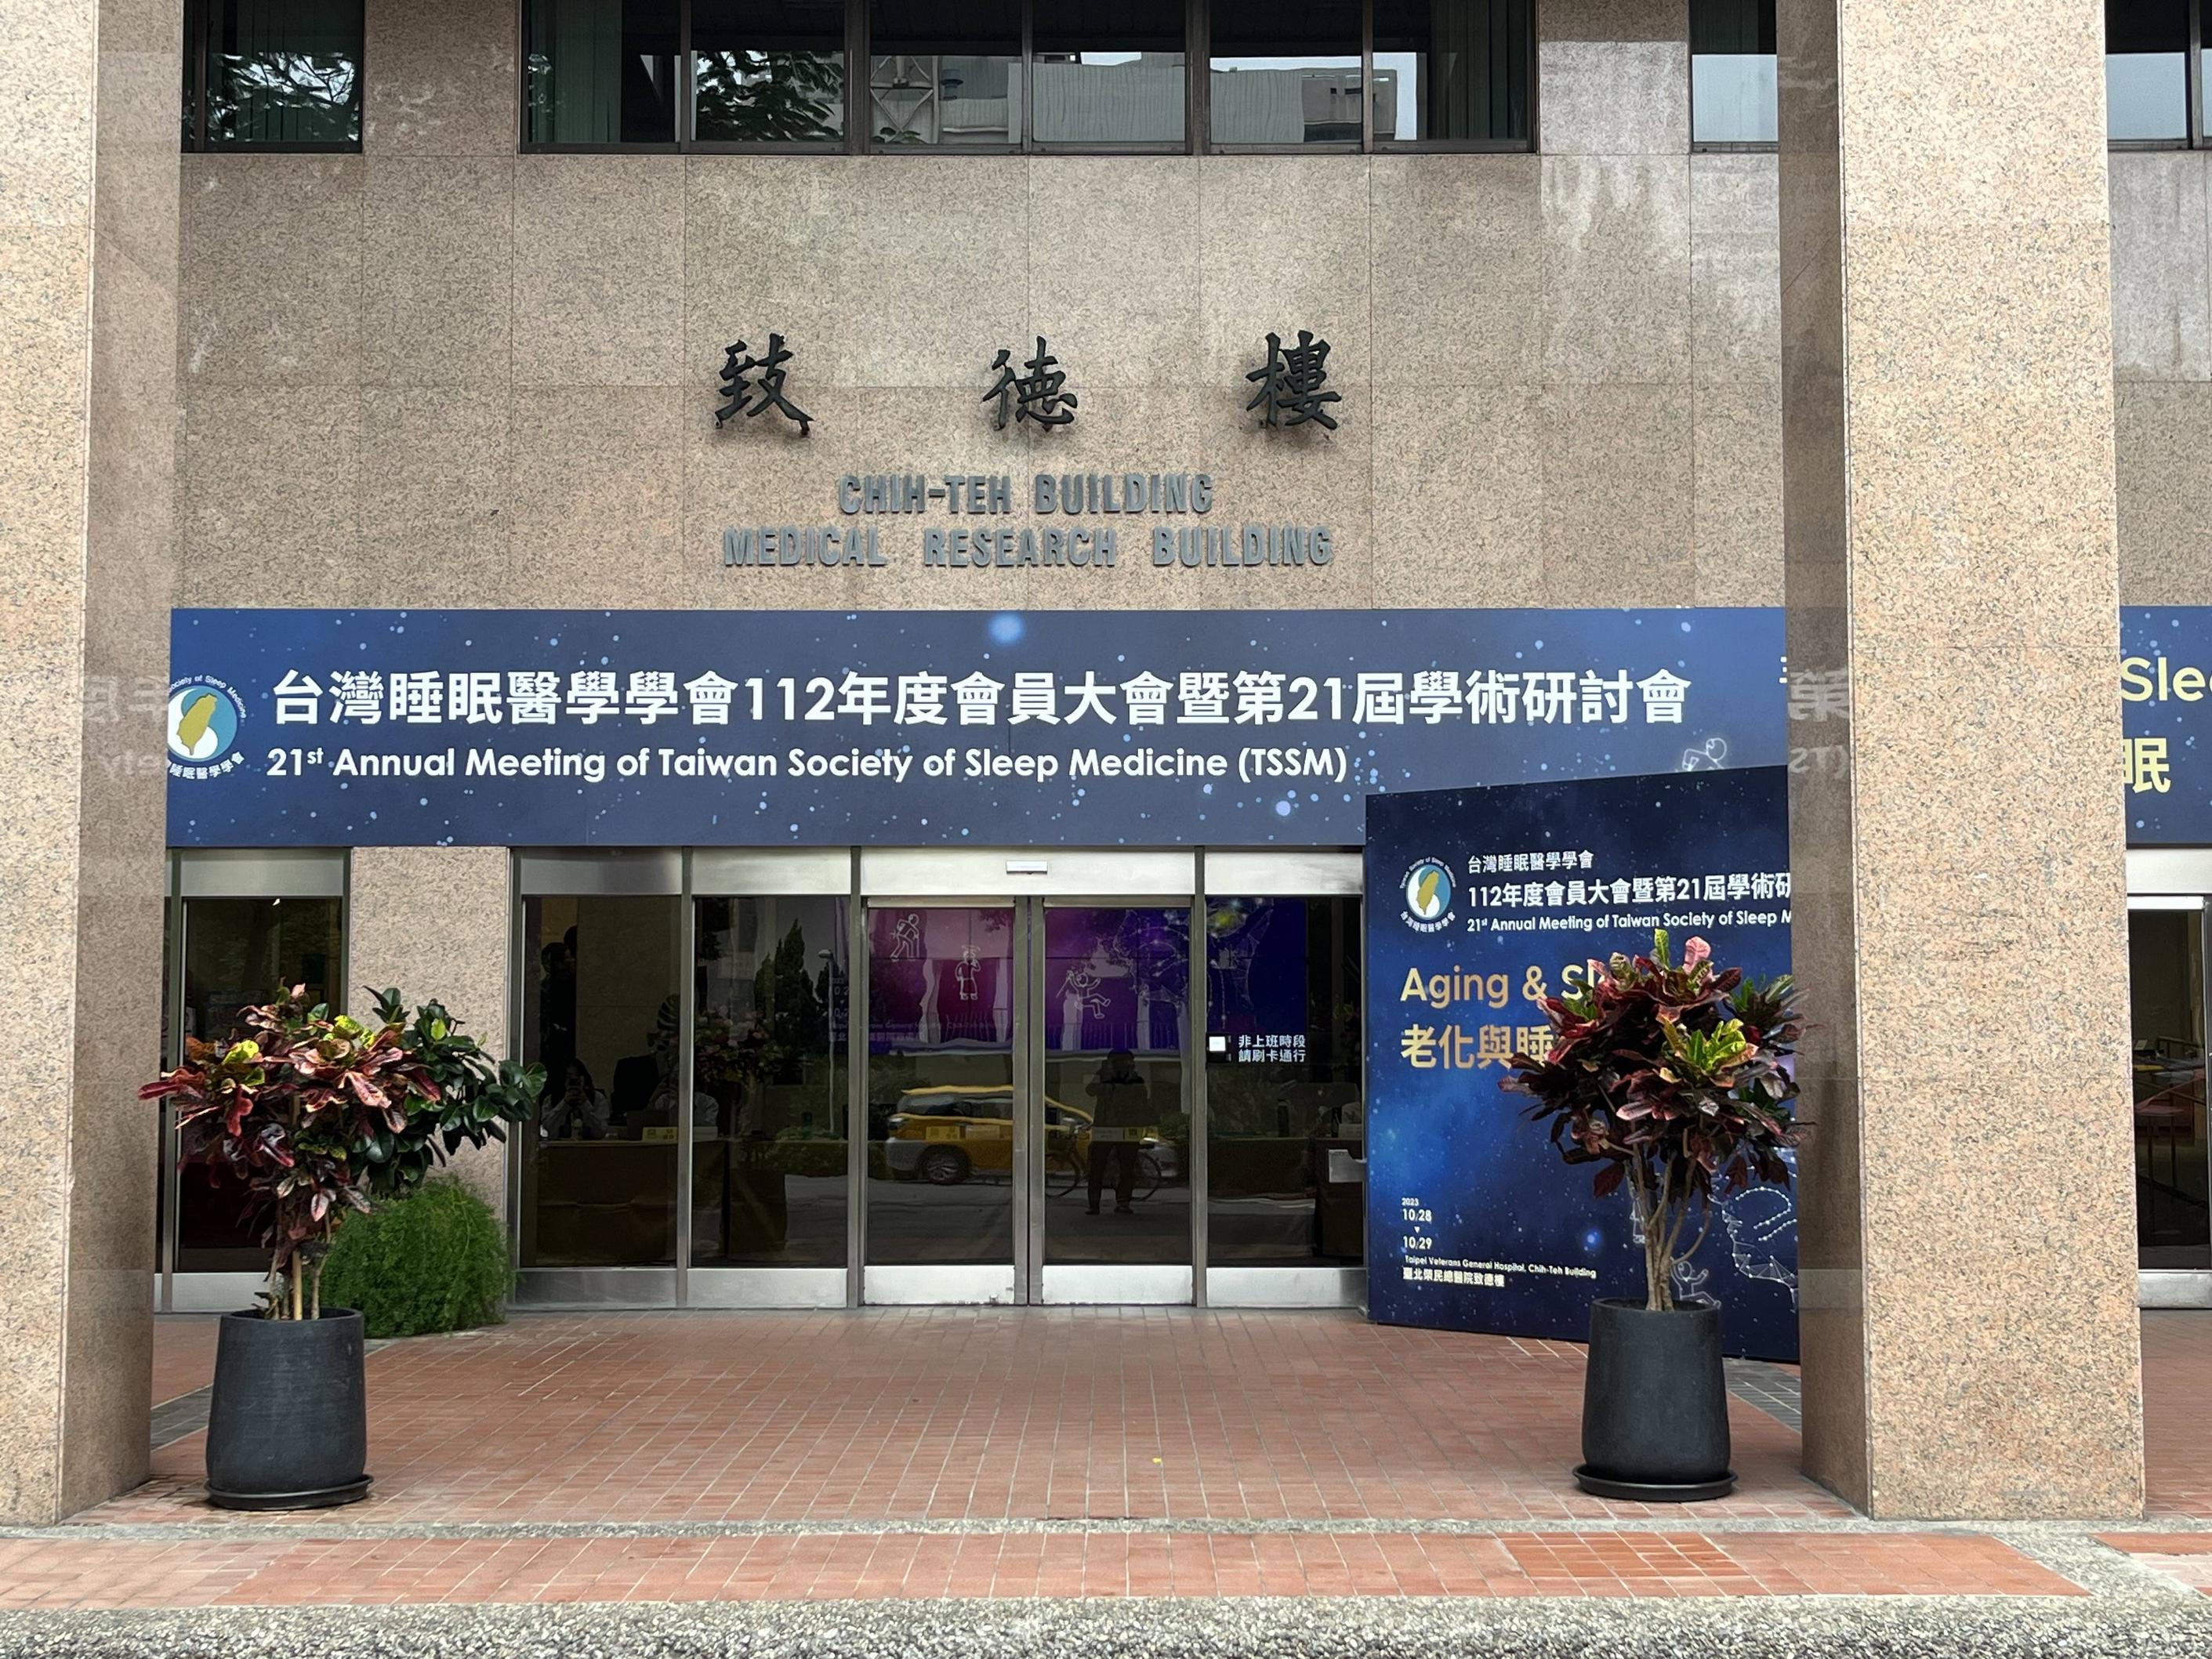 Participating 21st Annual Meeting of Taiwan Society of Sleep Medicine (TSSM)